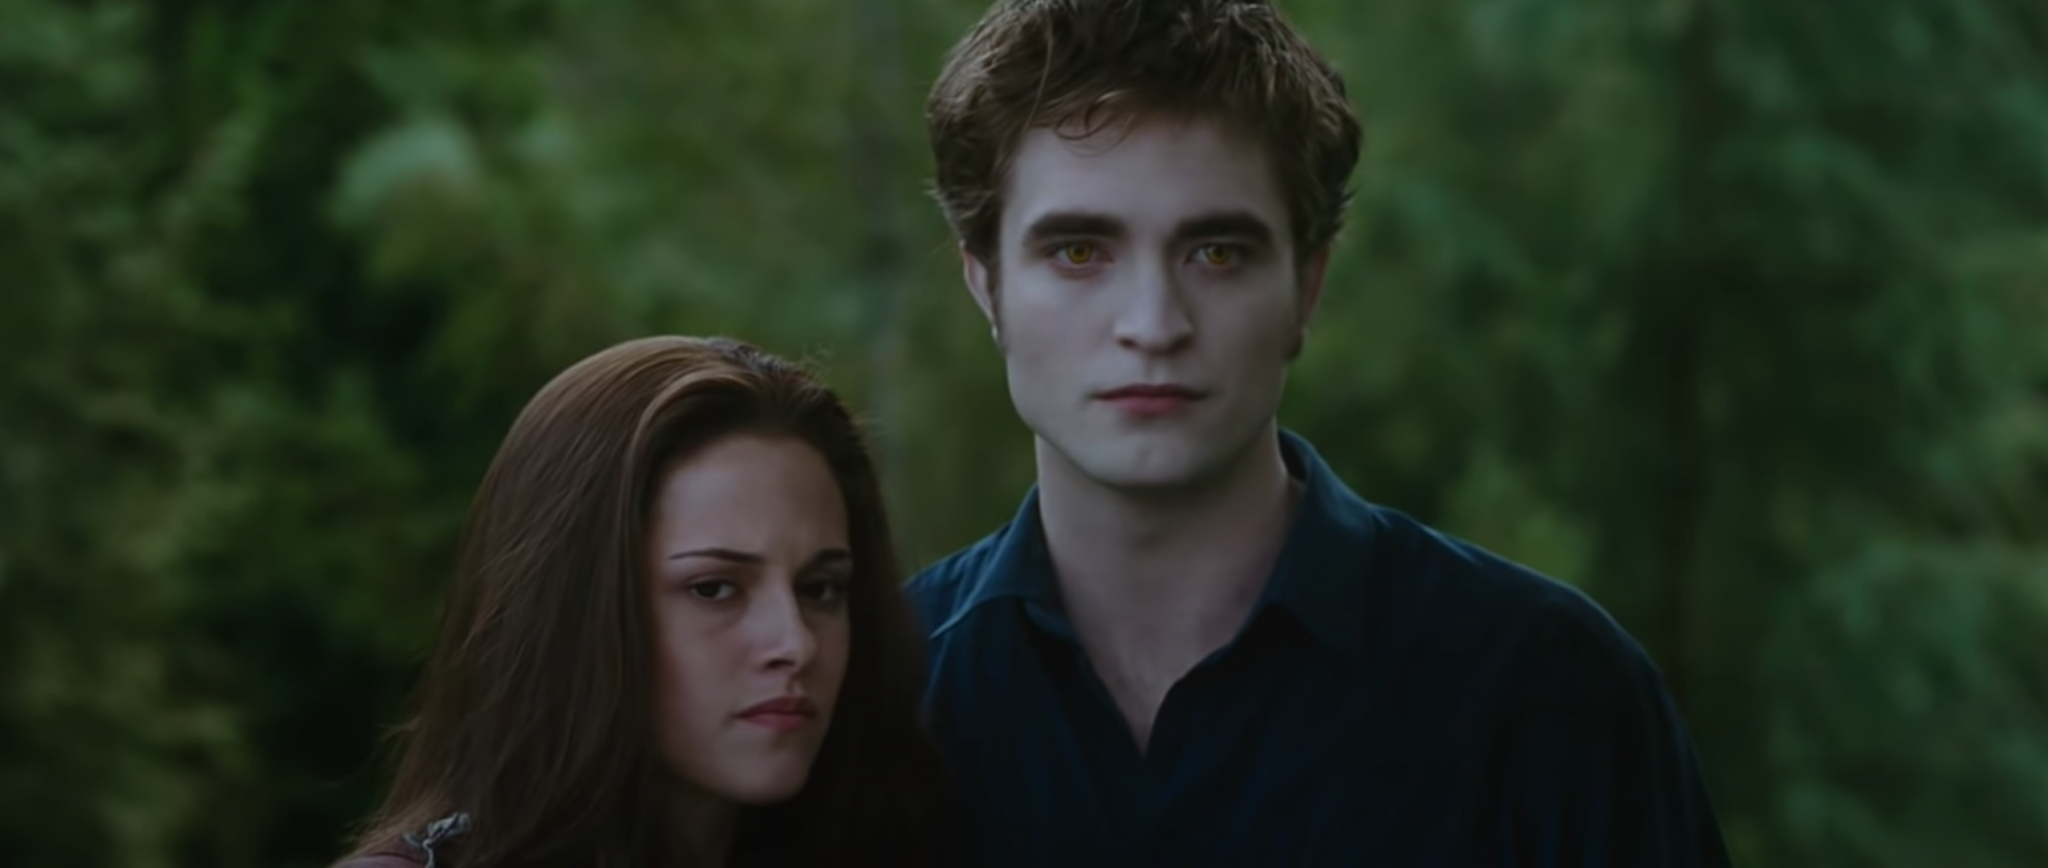 How to stream the Twilight movies in order online free today Streaming Wars